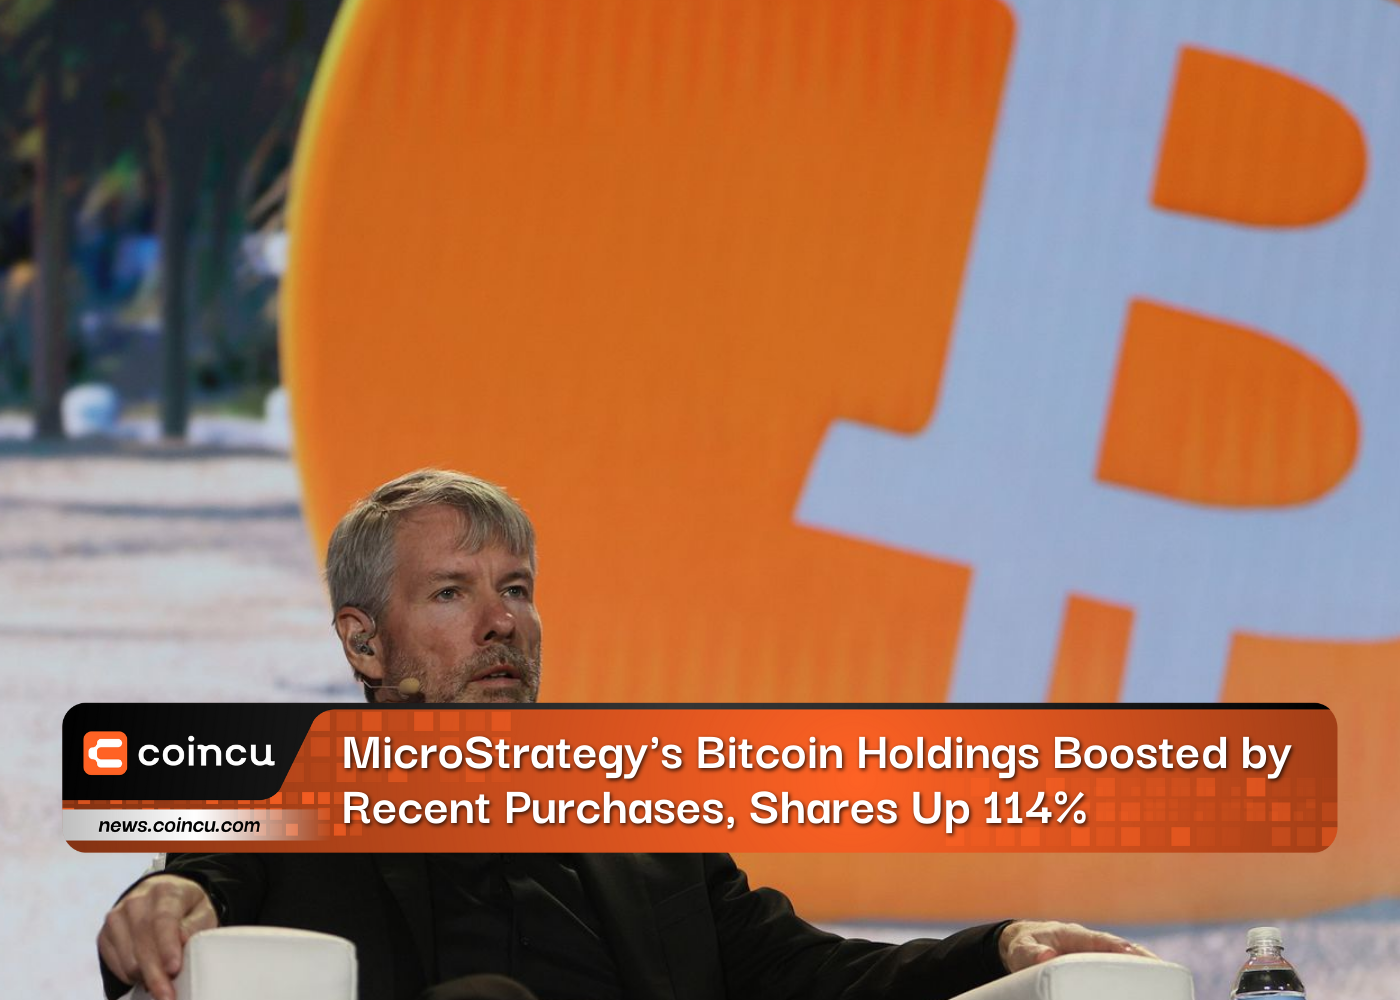 MicroStrategy's Bitcoin Holdings Boosted by Recent Purchases, Shares Up 114%